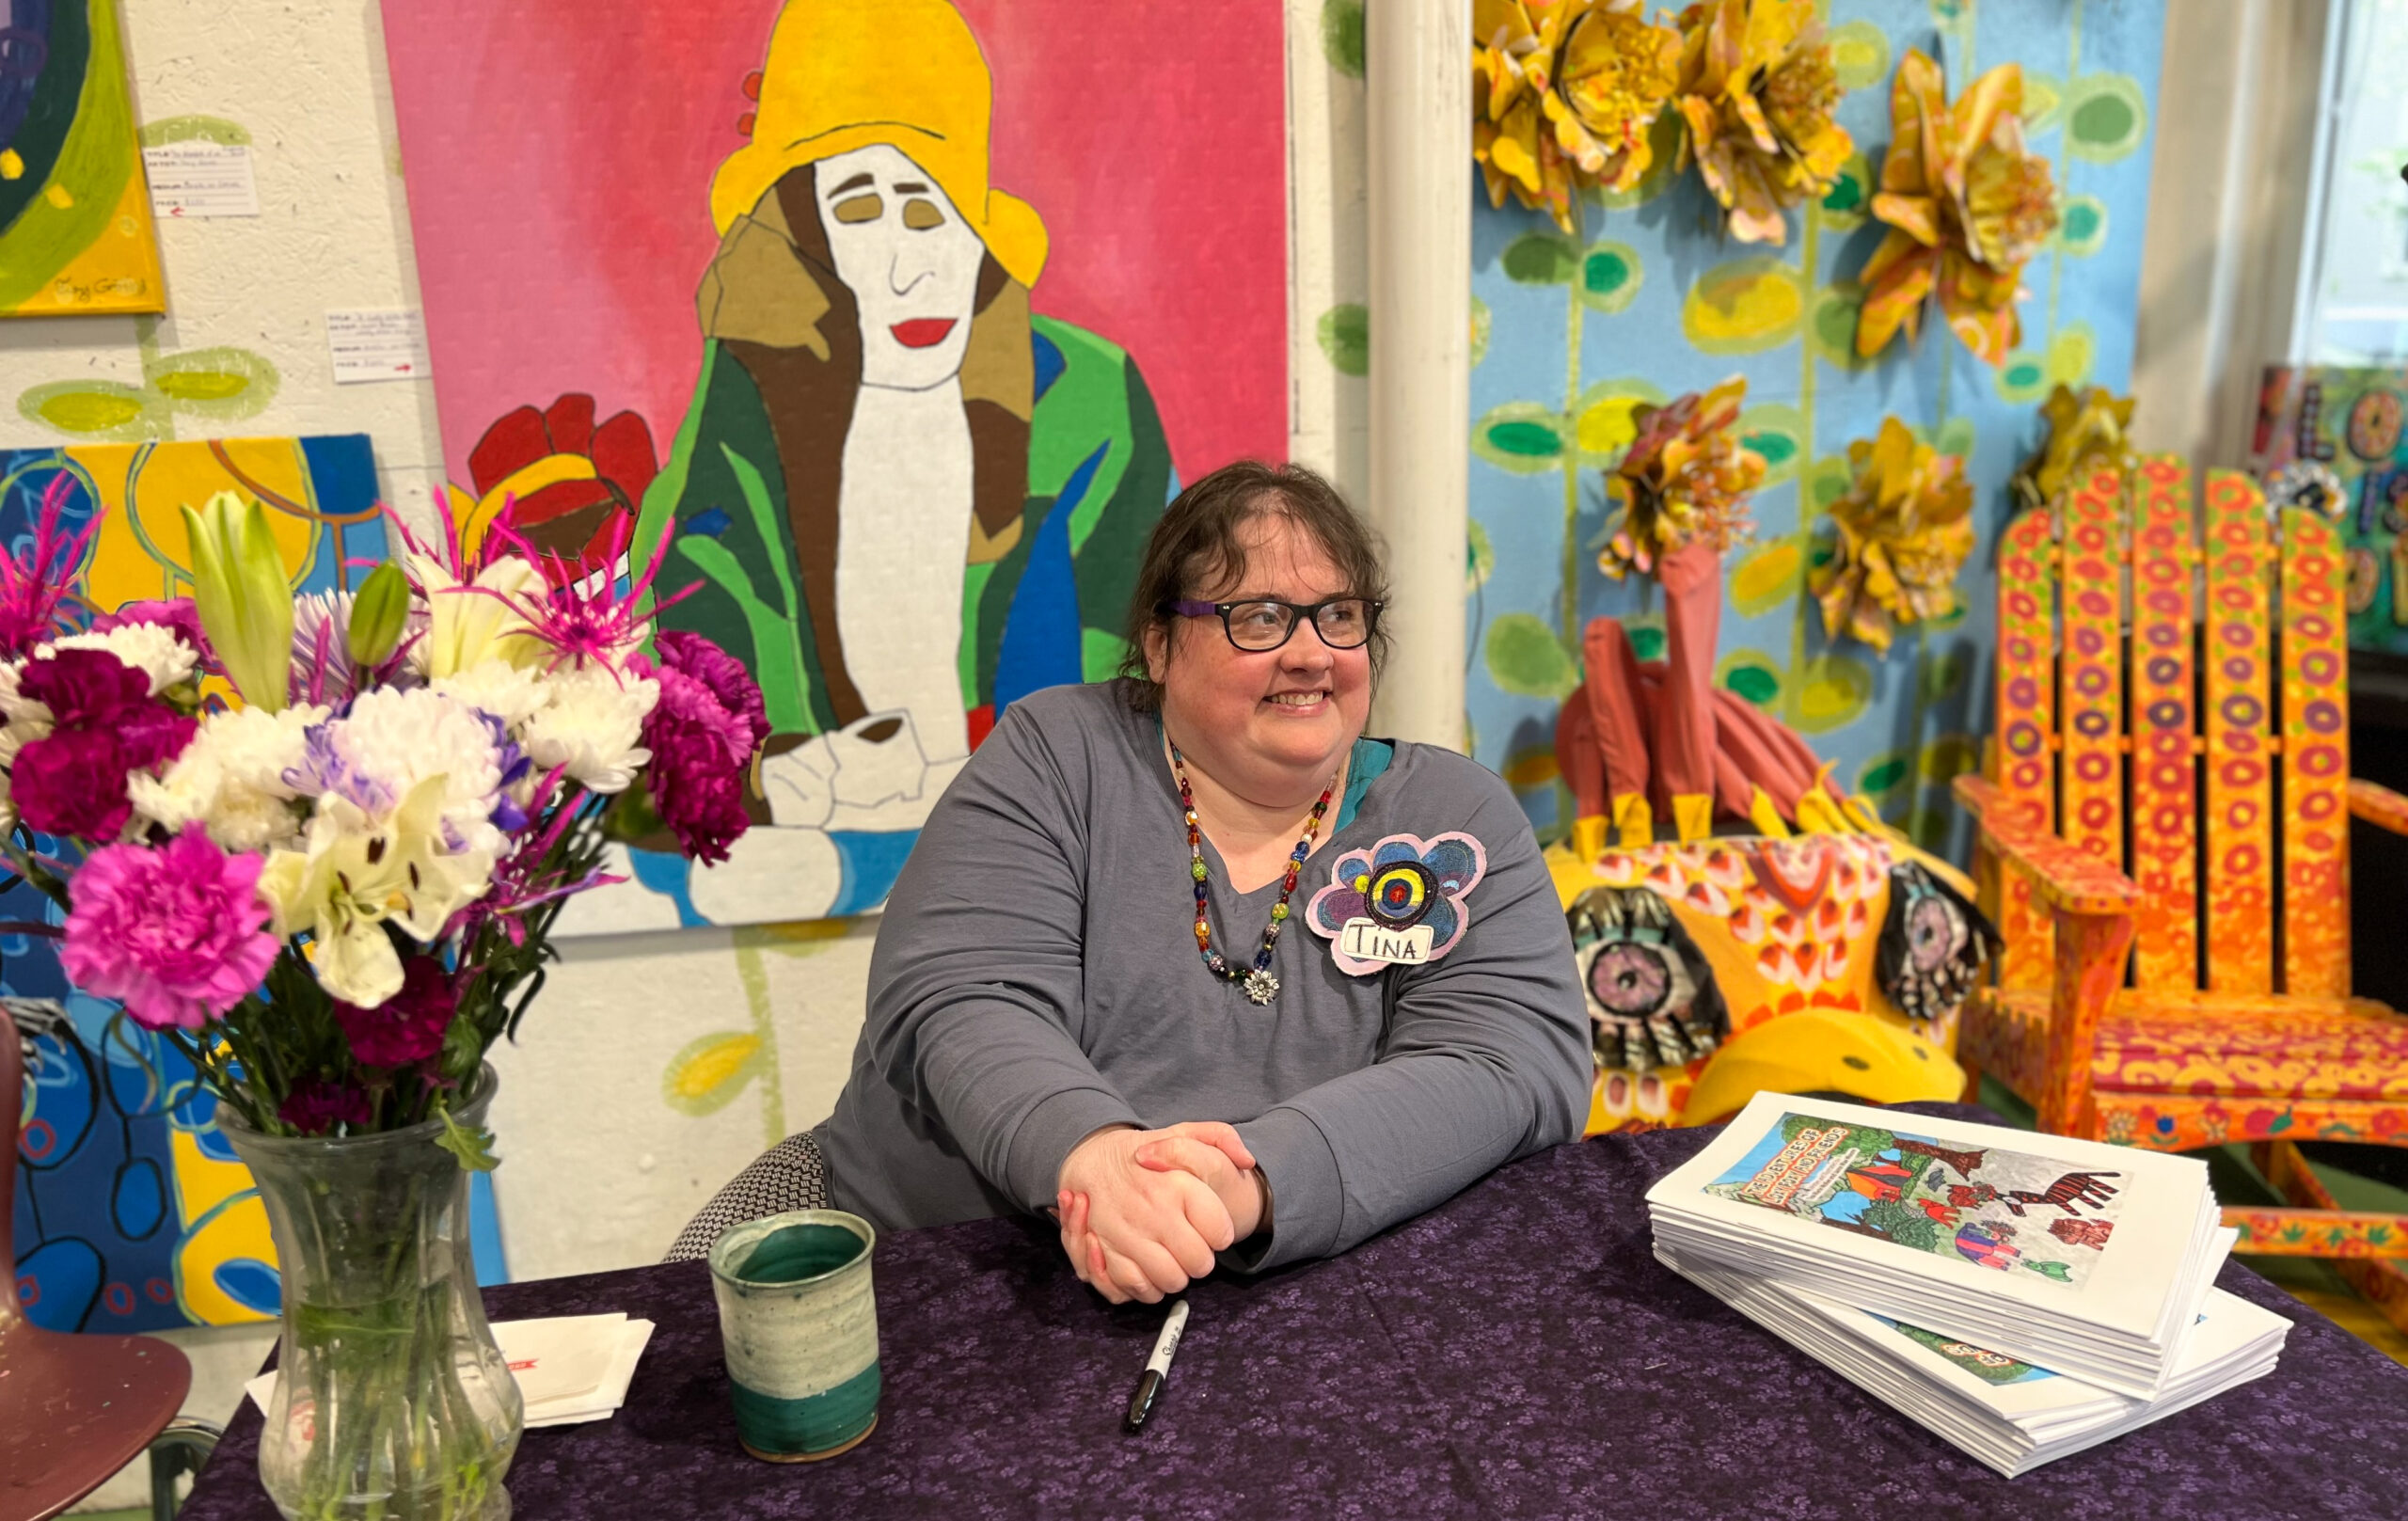 A person is seated at a table with only their upper body visible, hands clasped together, and smiling. They are wearing a name tag that reads "Tina" and are seated at a table with a stack of books. There is a vase filled with flowers off to the side and behind them is a colorful painting.